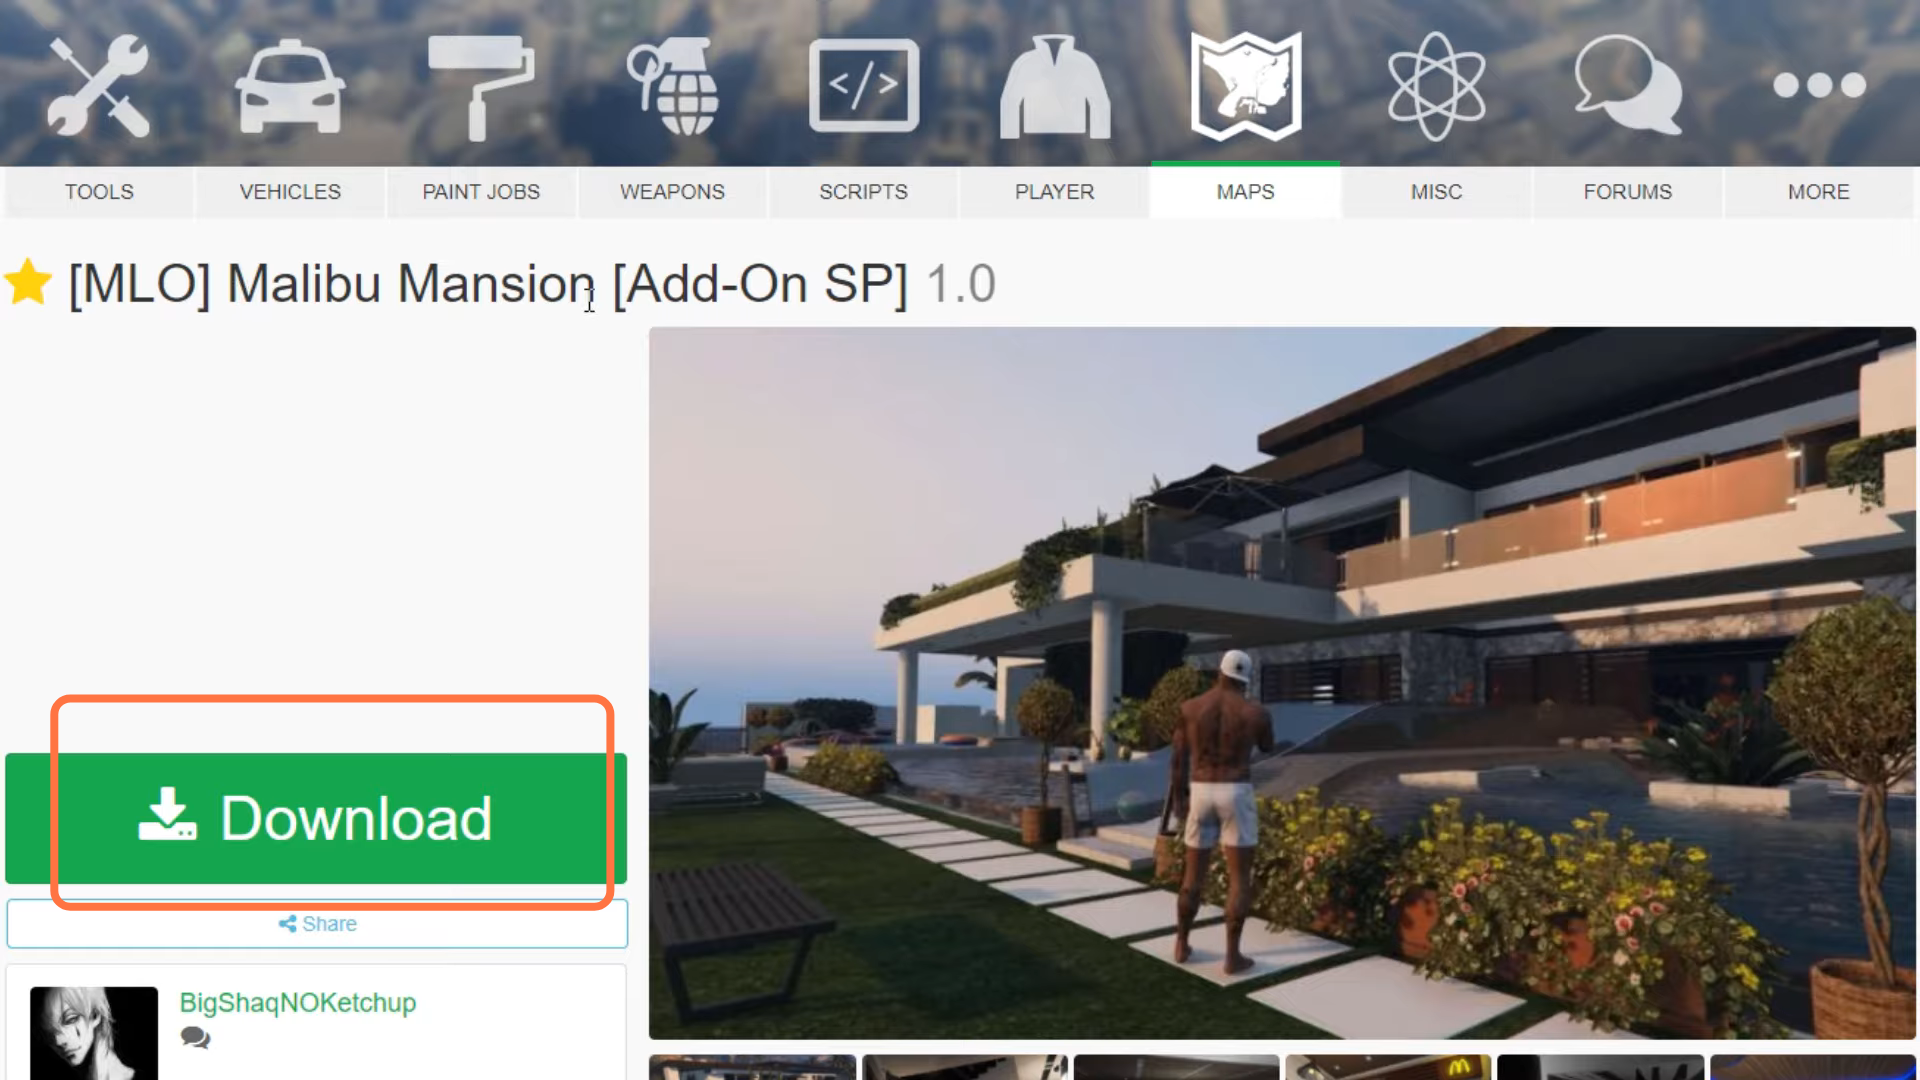 You will need MALIBU MANSION Mod and Open IV to download this mod in GTA 5   Click on the following link to download Malibu Mansion Mod and tap on the download option.  https://www.gta5-mods.com/maps/malibu-mansion-add-on  